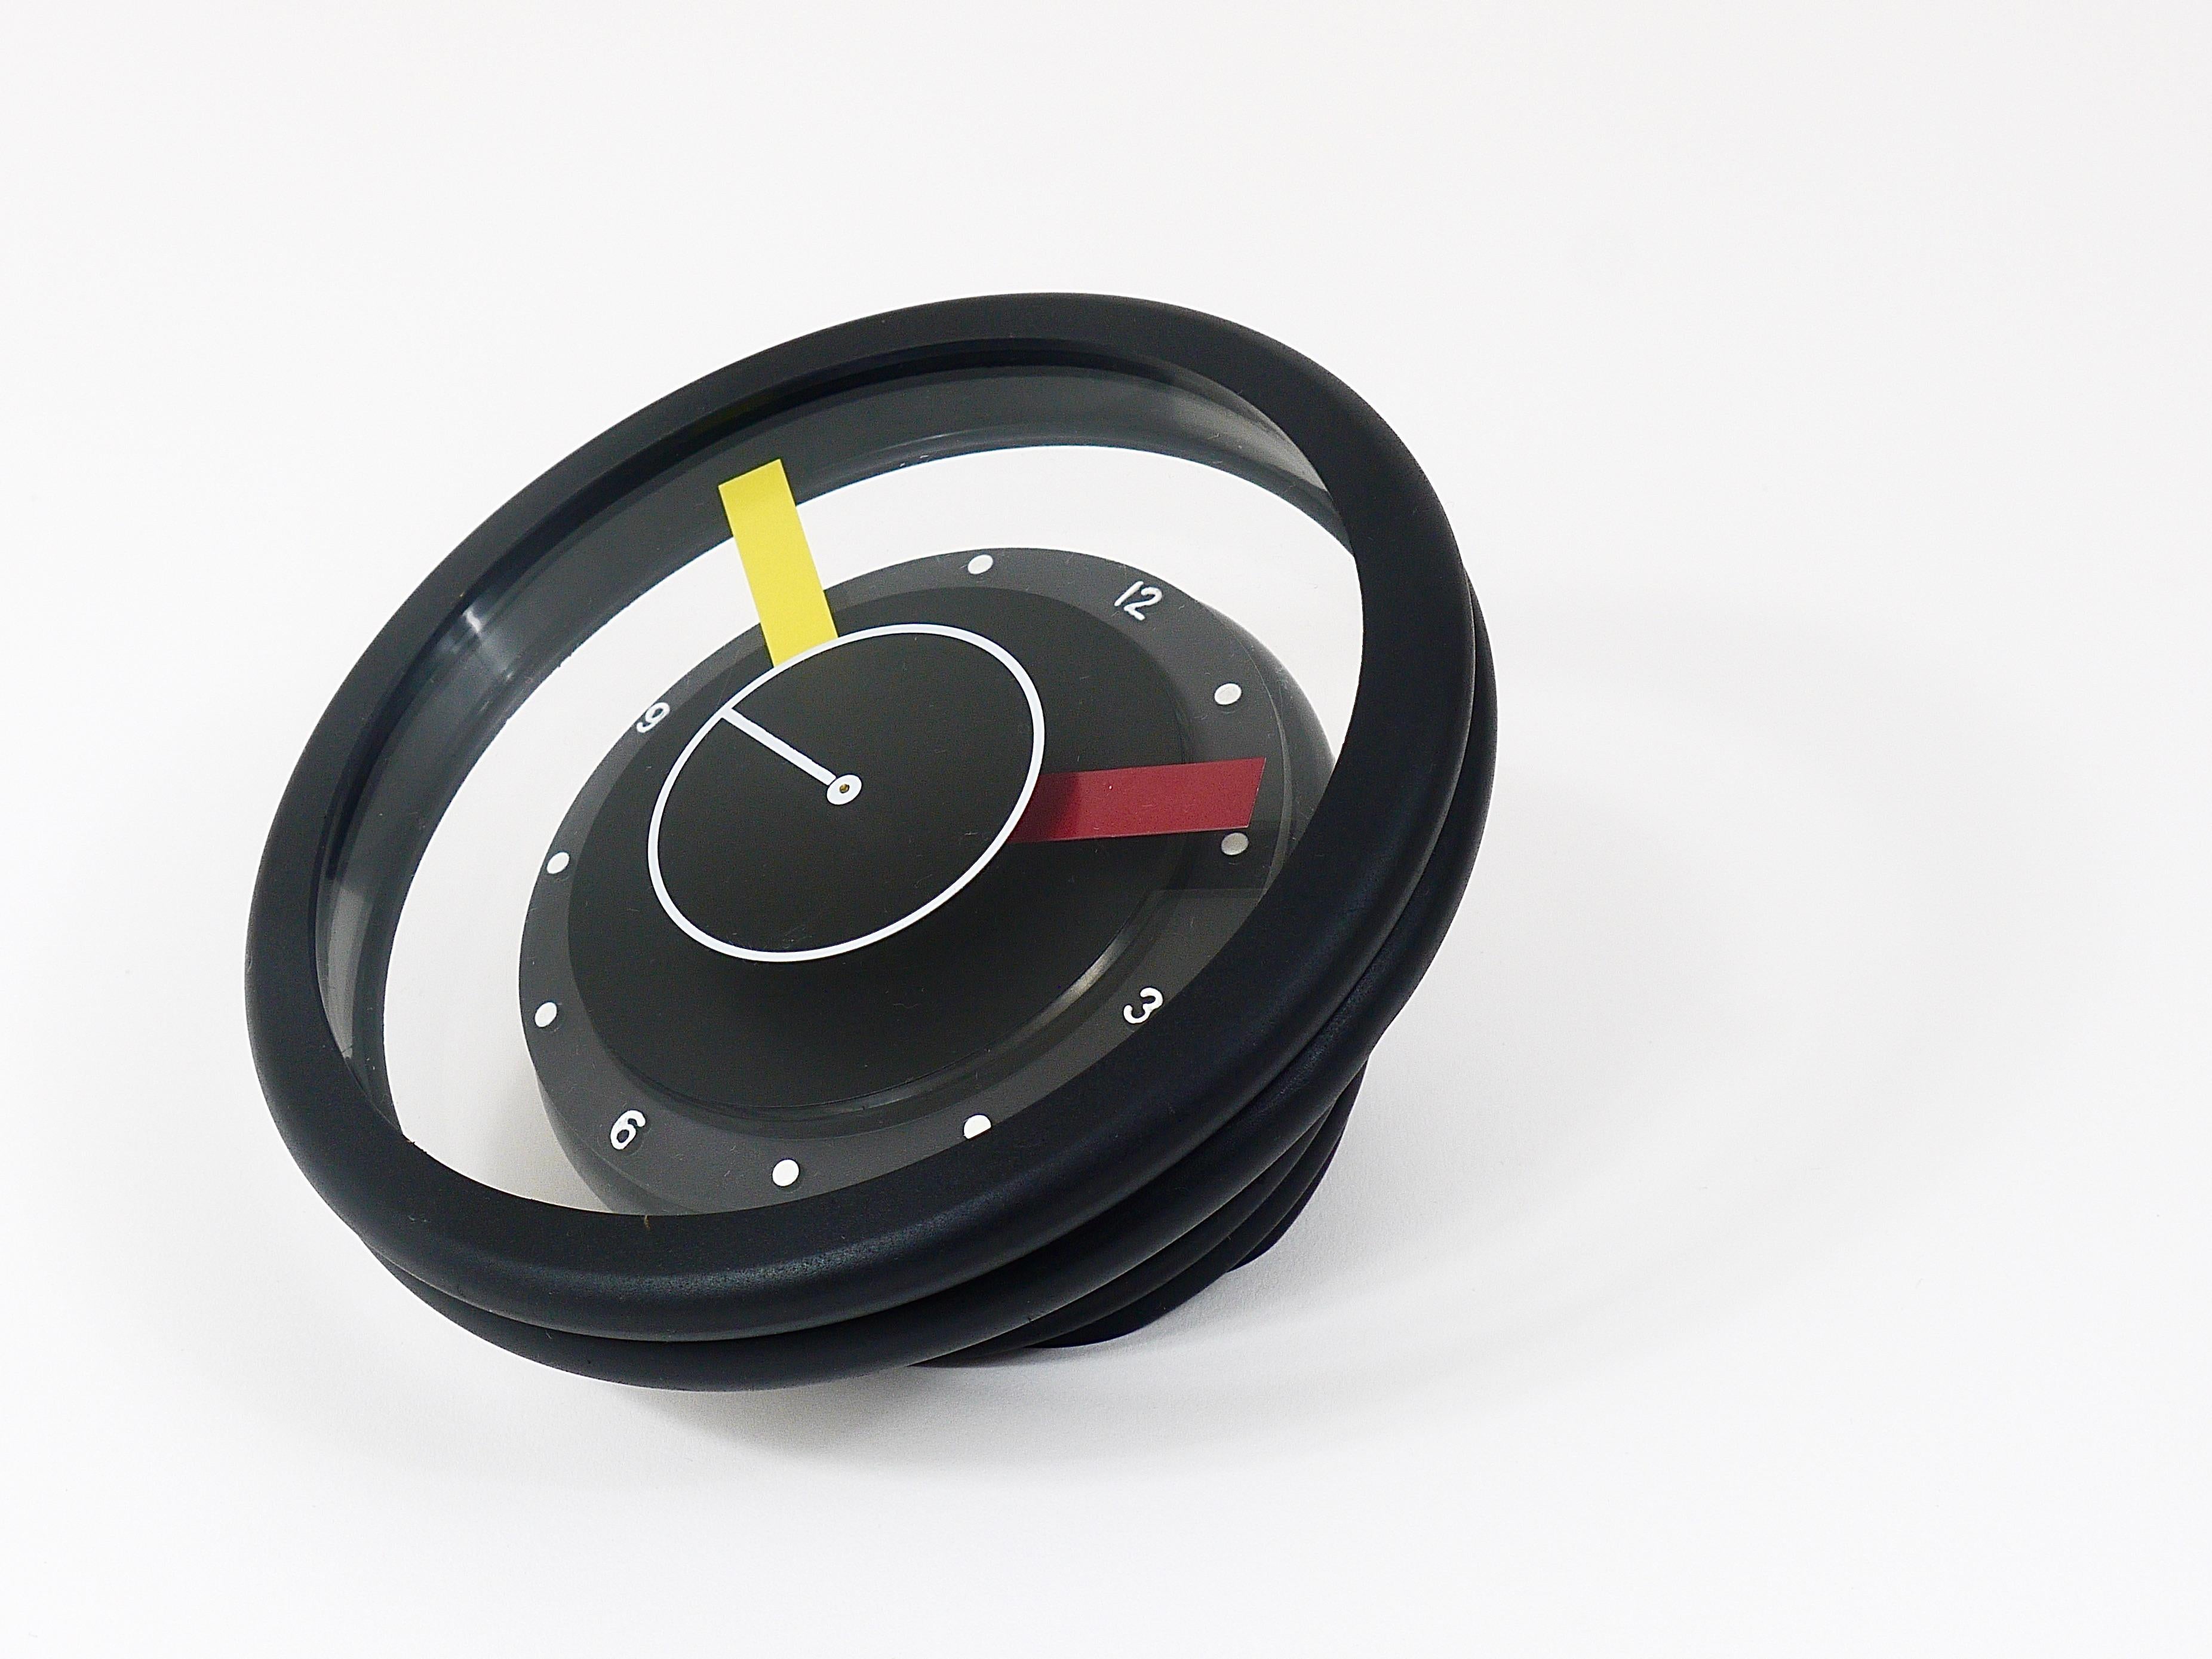 Postmodern Round Pop Art Desk or Table Clock, Memphis Milano Style, Italy, 1990s For Sale 1